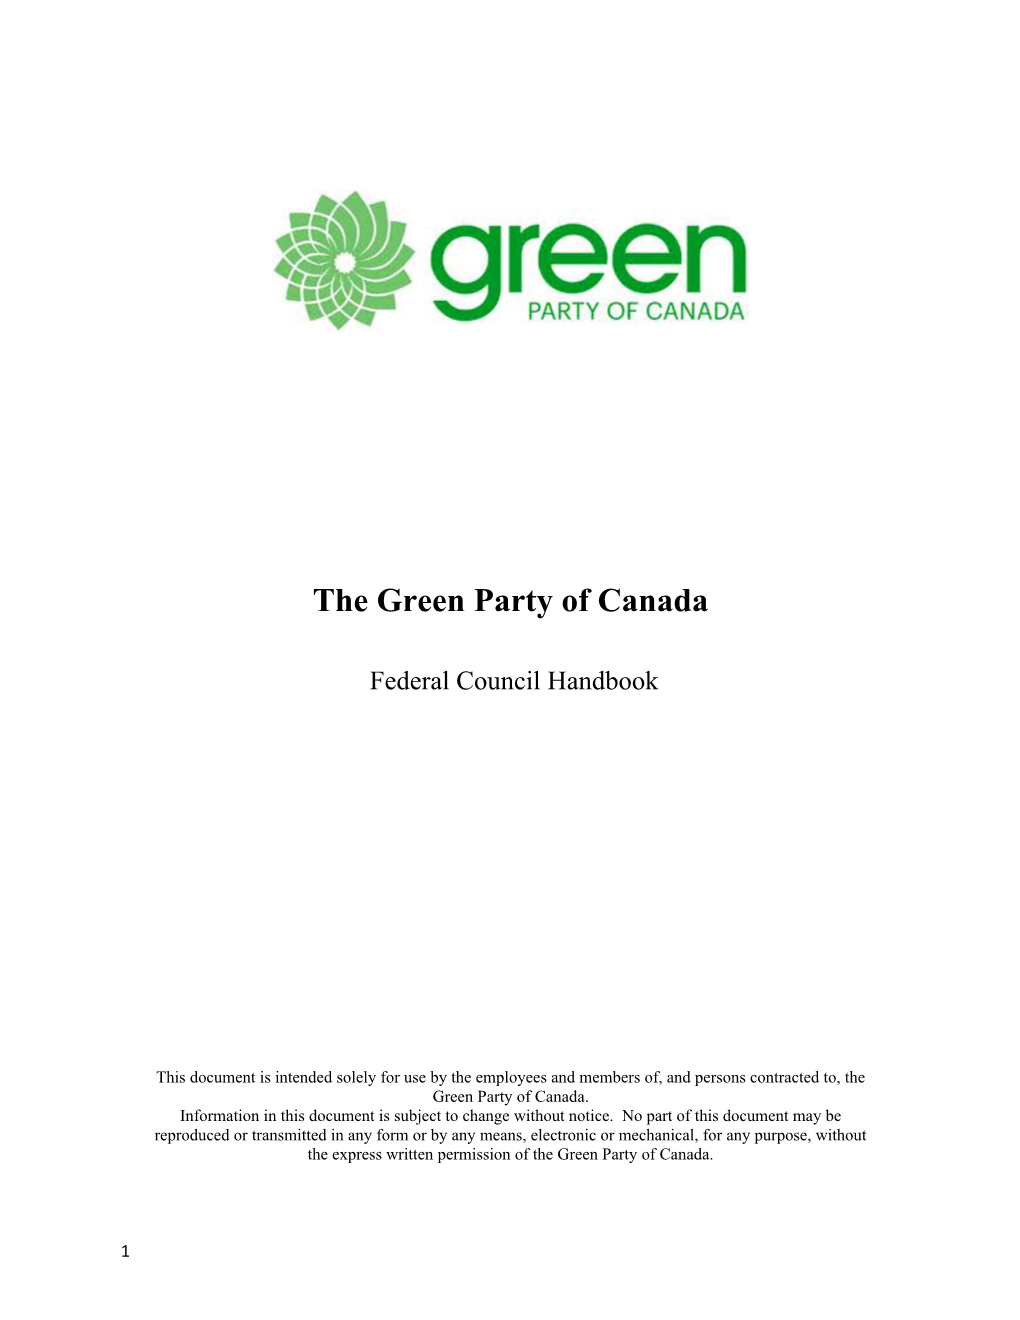 The Green Party of Canada